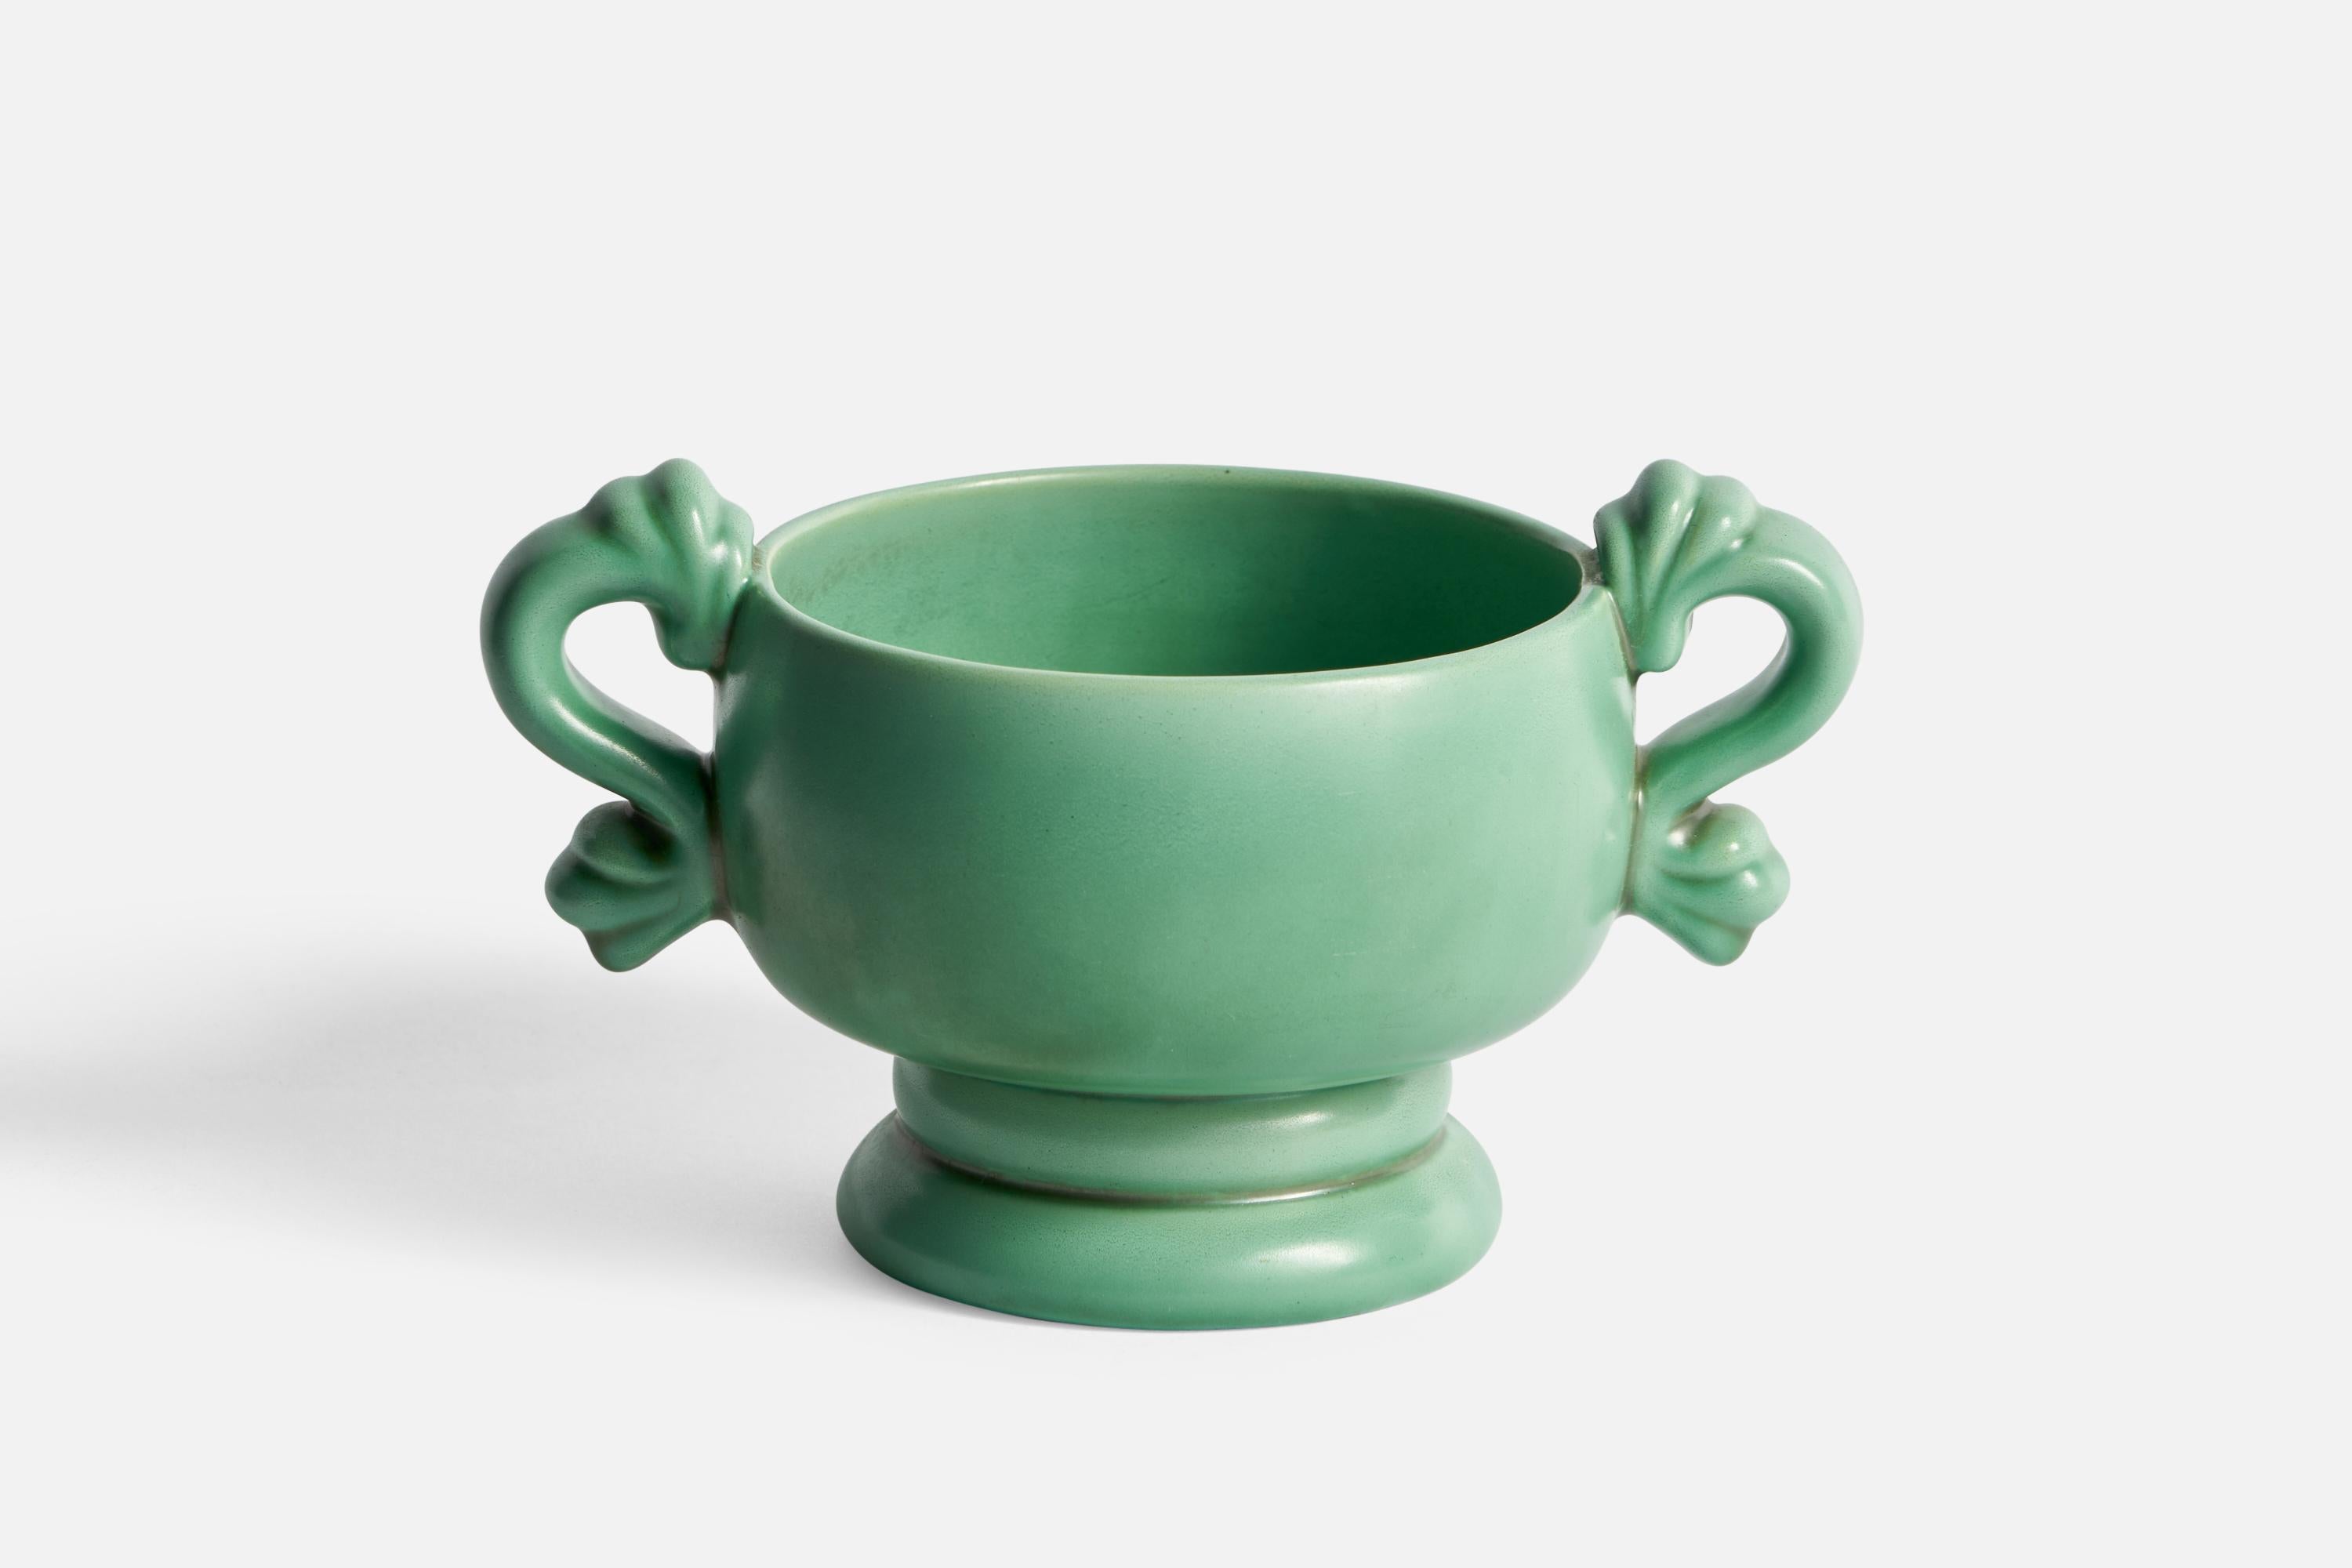 A celadon-green-glazed ceramic bowl or cup designed by Arthur Percy and produced by Gefle, Sweden, 1930s.